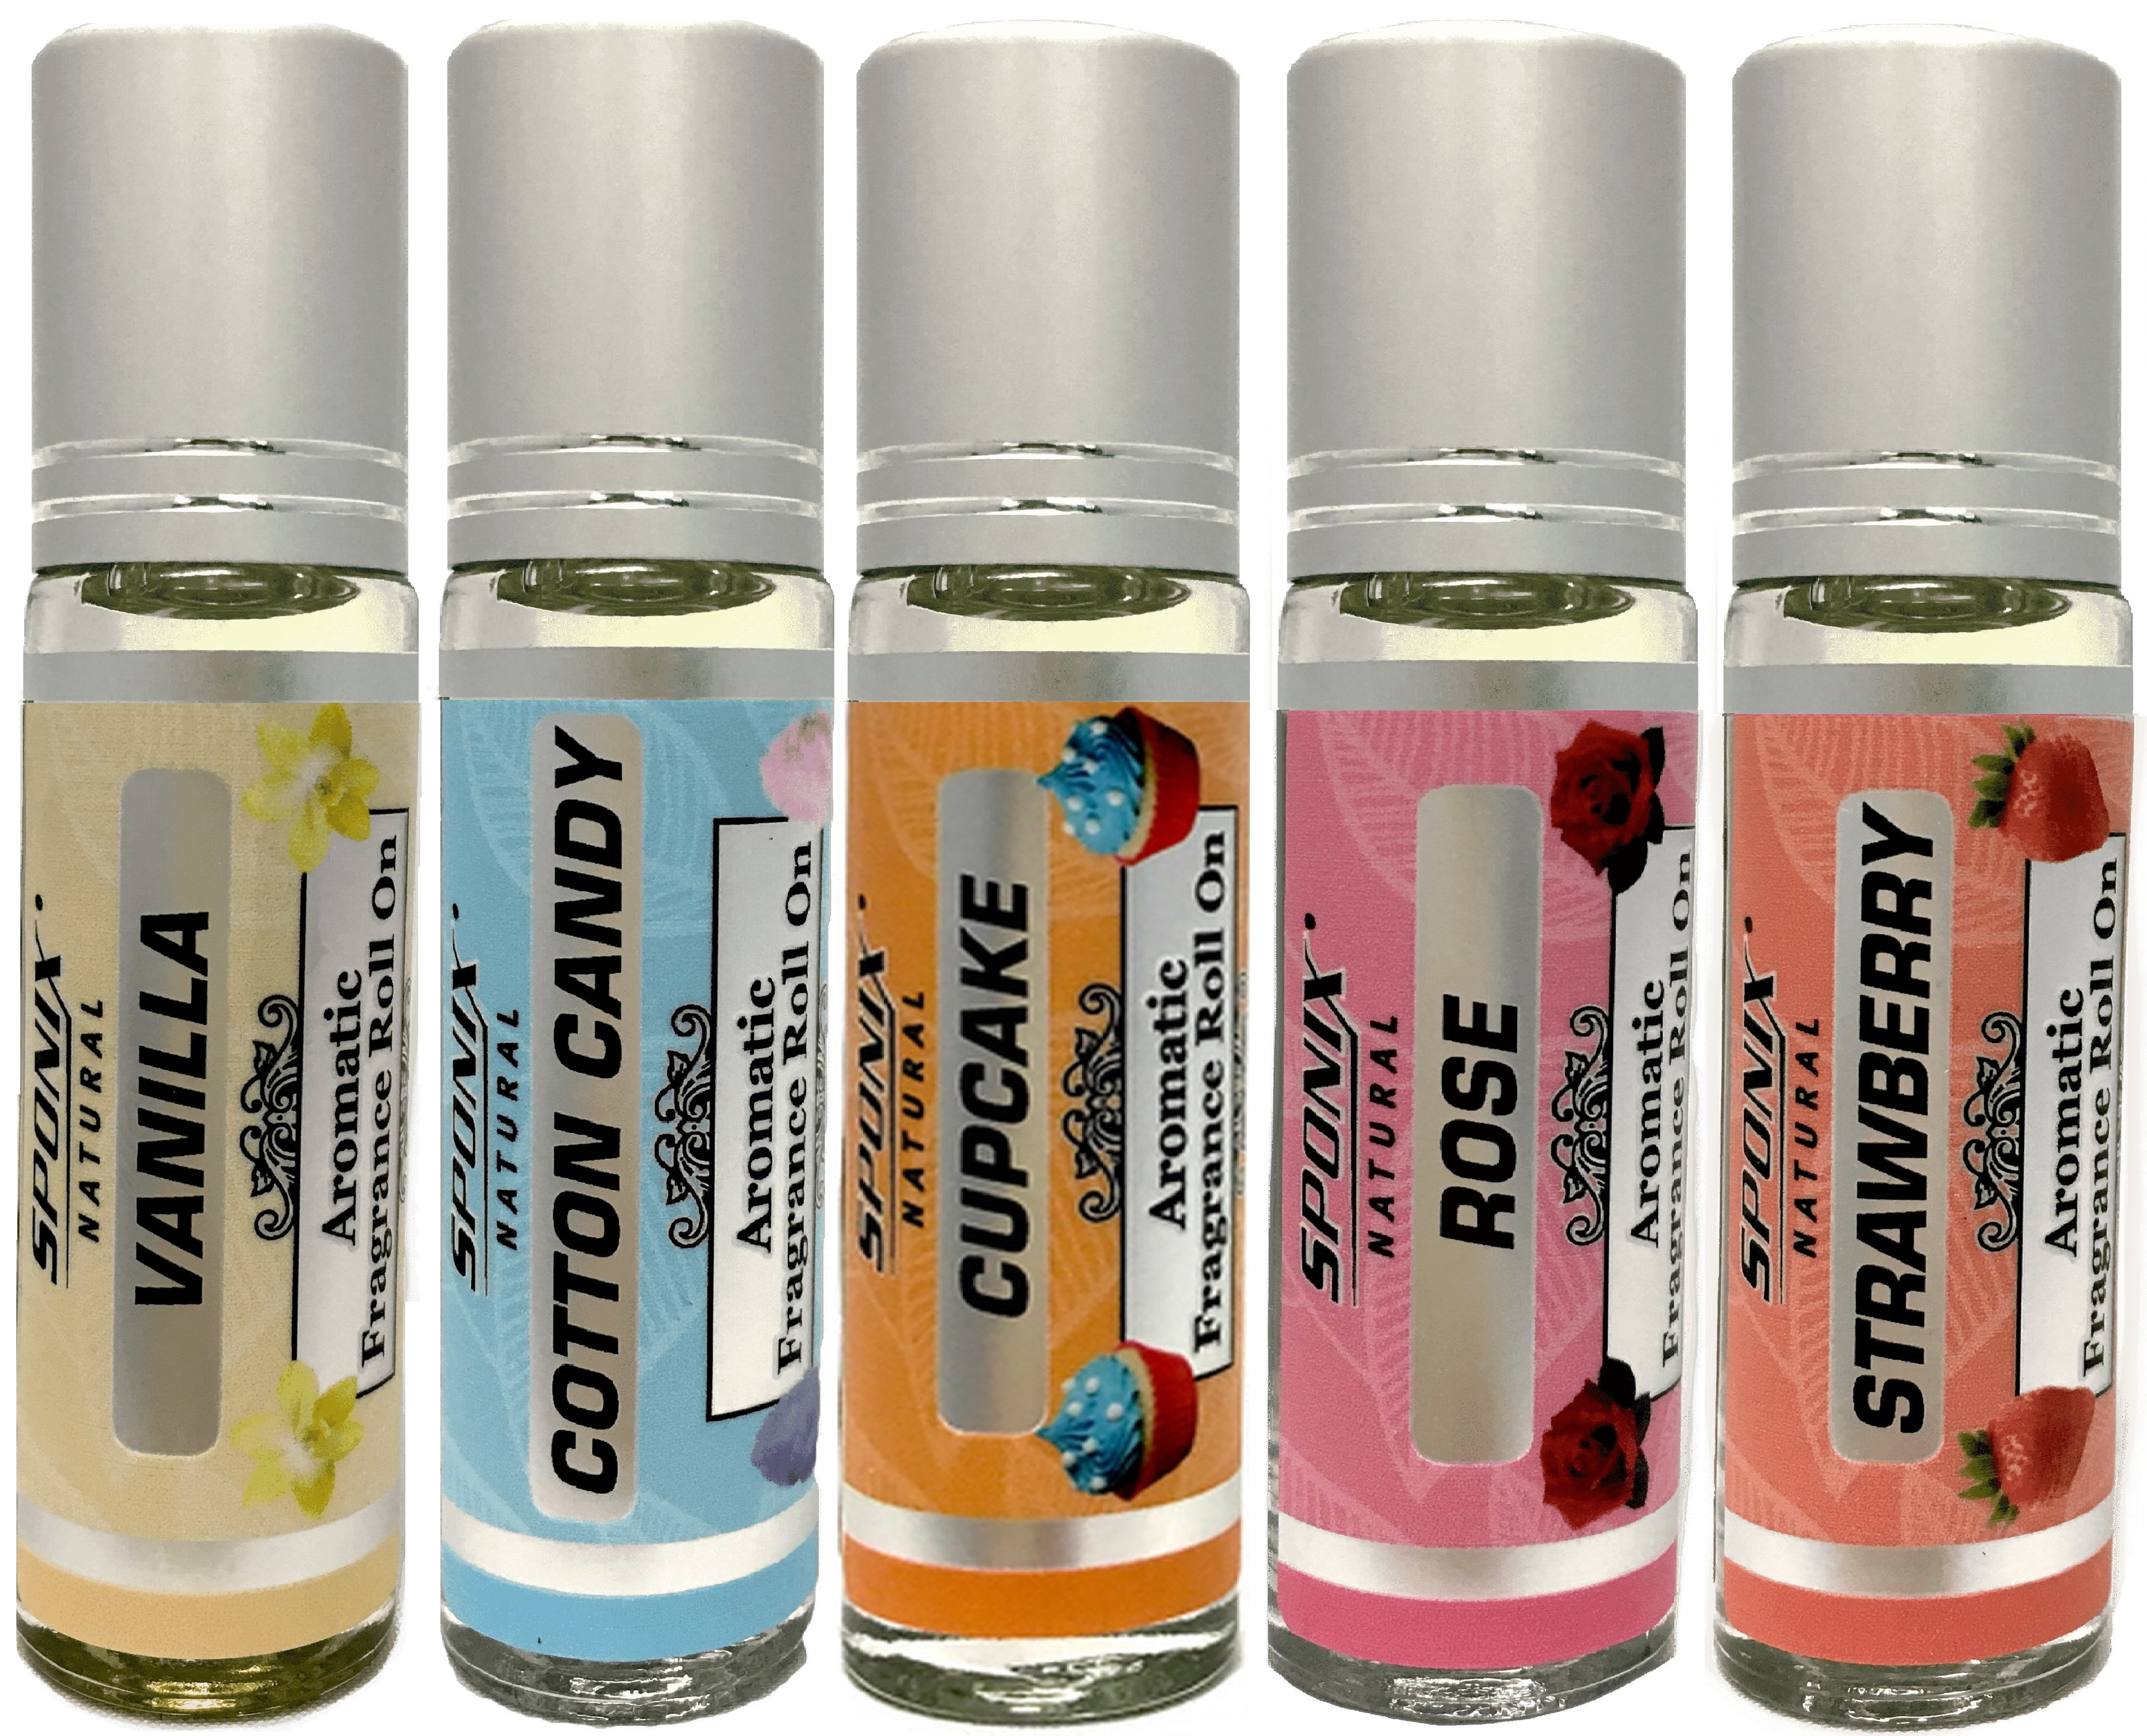 Cotton Candy Fragrance Oil 10 ml / 0.33 oz - 100% Pure - Made in USA by  Sponix Pack of 3 